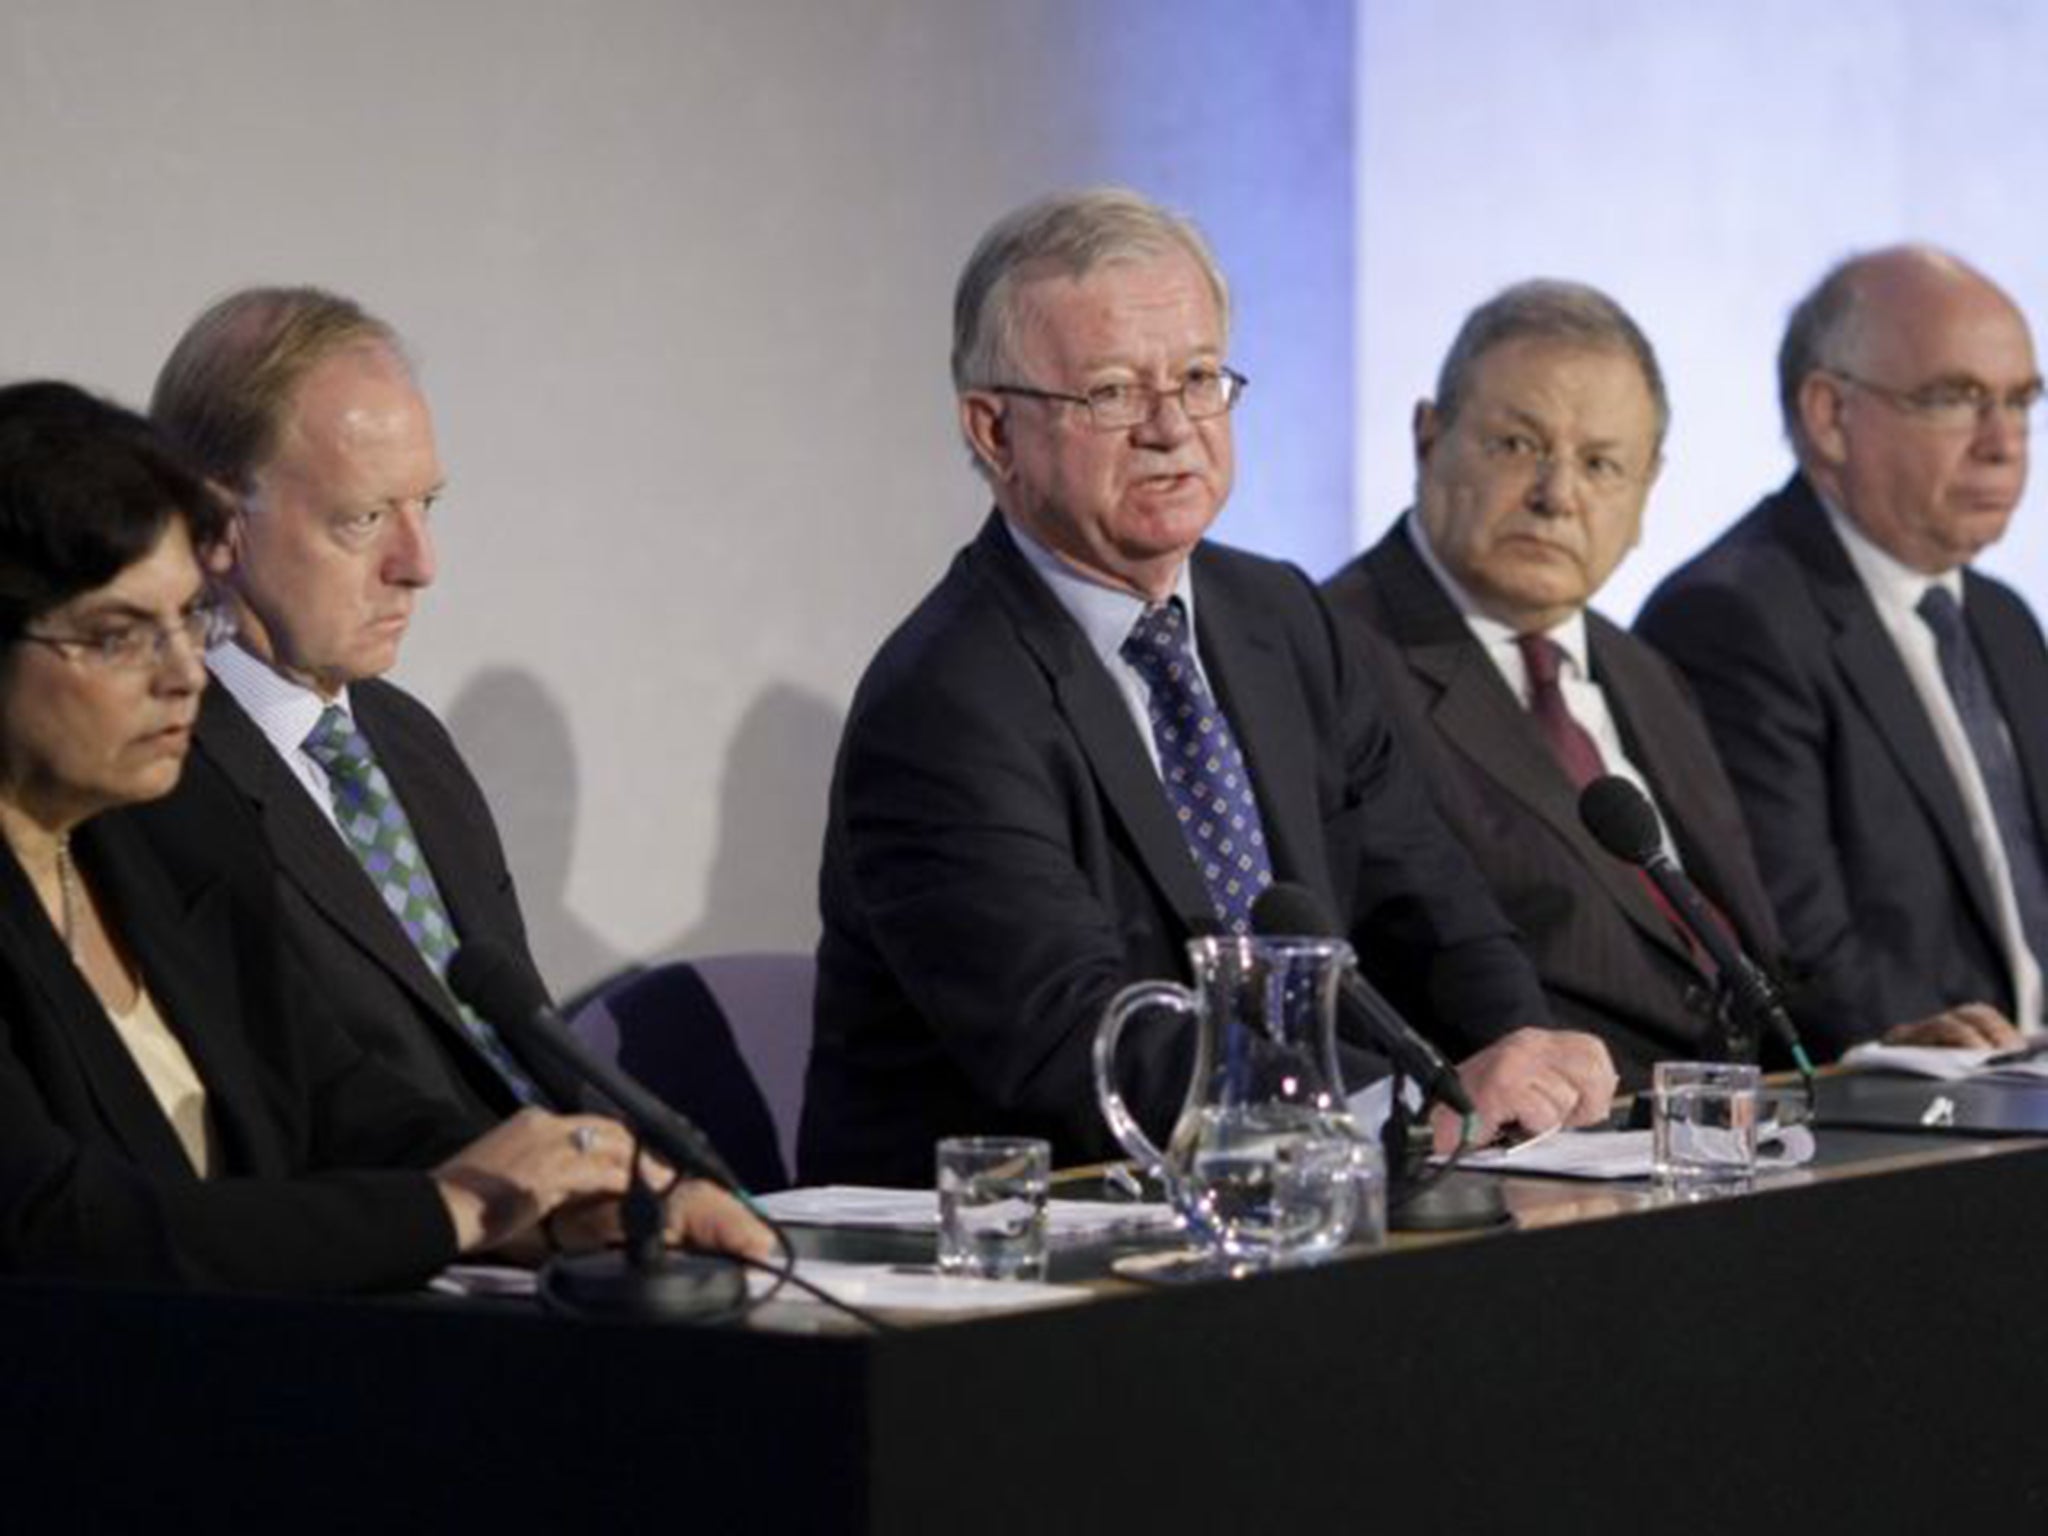 Sir John Chilcot and his fellow committee members have shared more than £1.5m in fees since the inquiry began in 2009